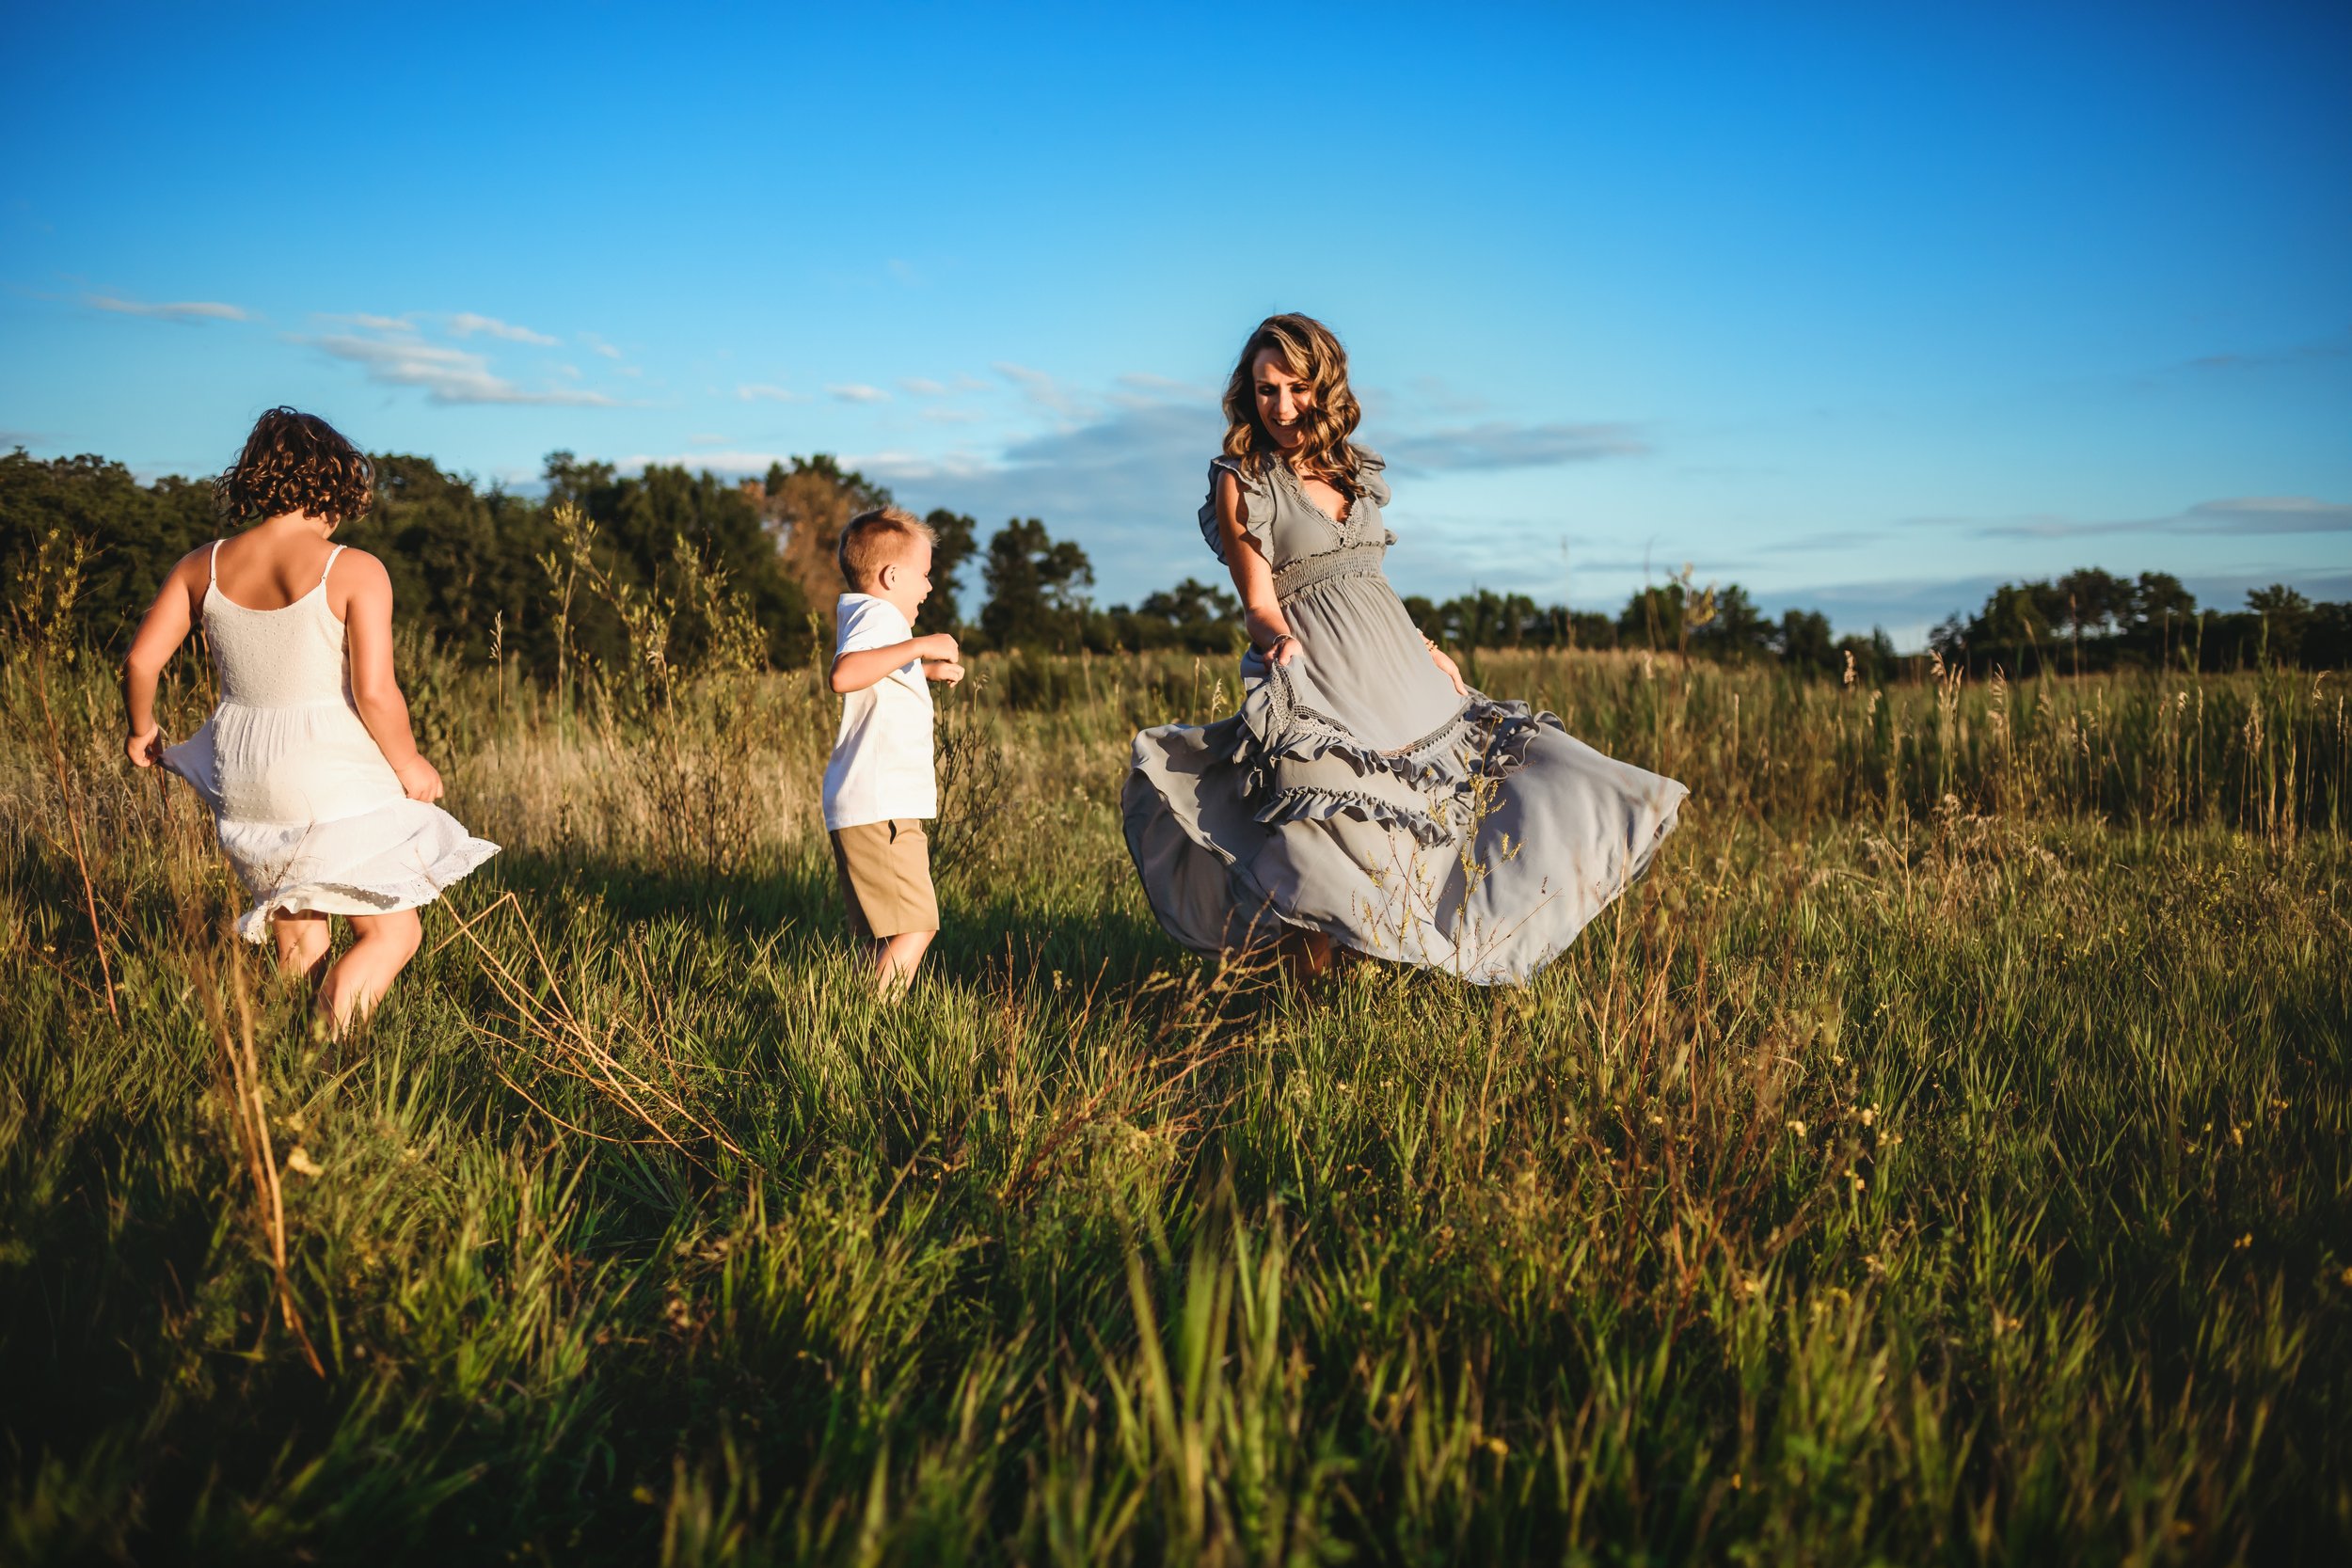  Teala Ward Photography captures a mother and her children dancing in an Illinois Meadow at dusk. Dancing family pictures Illinois #motherhood #mommapics #TealaWardPhotography #TealaWardFamilies #IllinoisPhotographers #IllinoisFamilyPhotography 